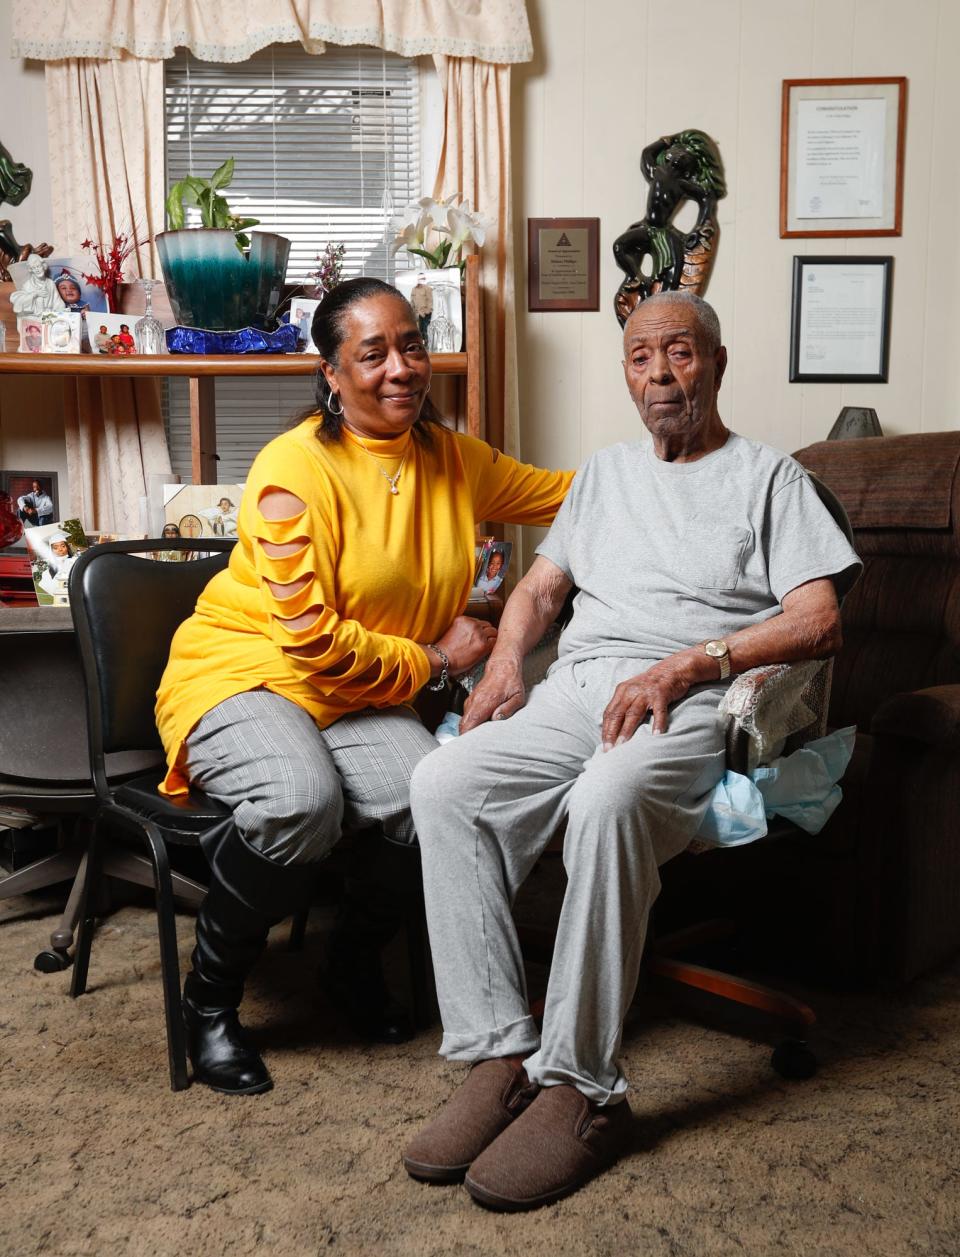 Alesha Holder, 58 and her great grandfather Hobart Phillips, who turns 102 on March 6th, are photographed on Wednesday, March 2, 2022, in their home in Norwood neighborhood of Indianapolis. Phillips parents built their home in the 1920's. The Norwood neighborhood was a Freetown built by Civil War veterans.